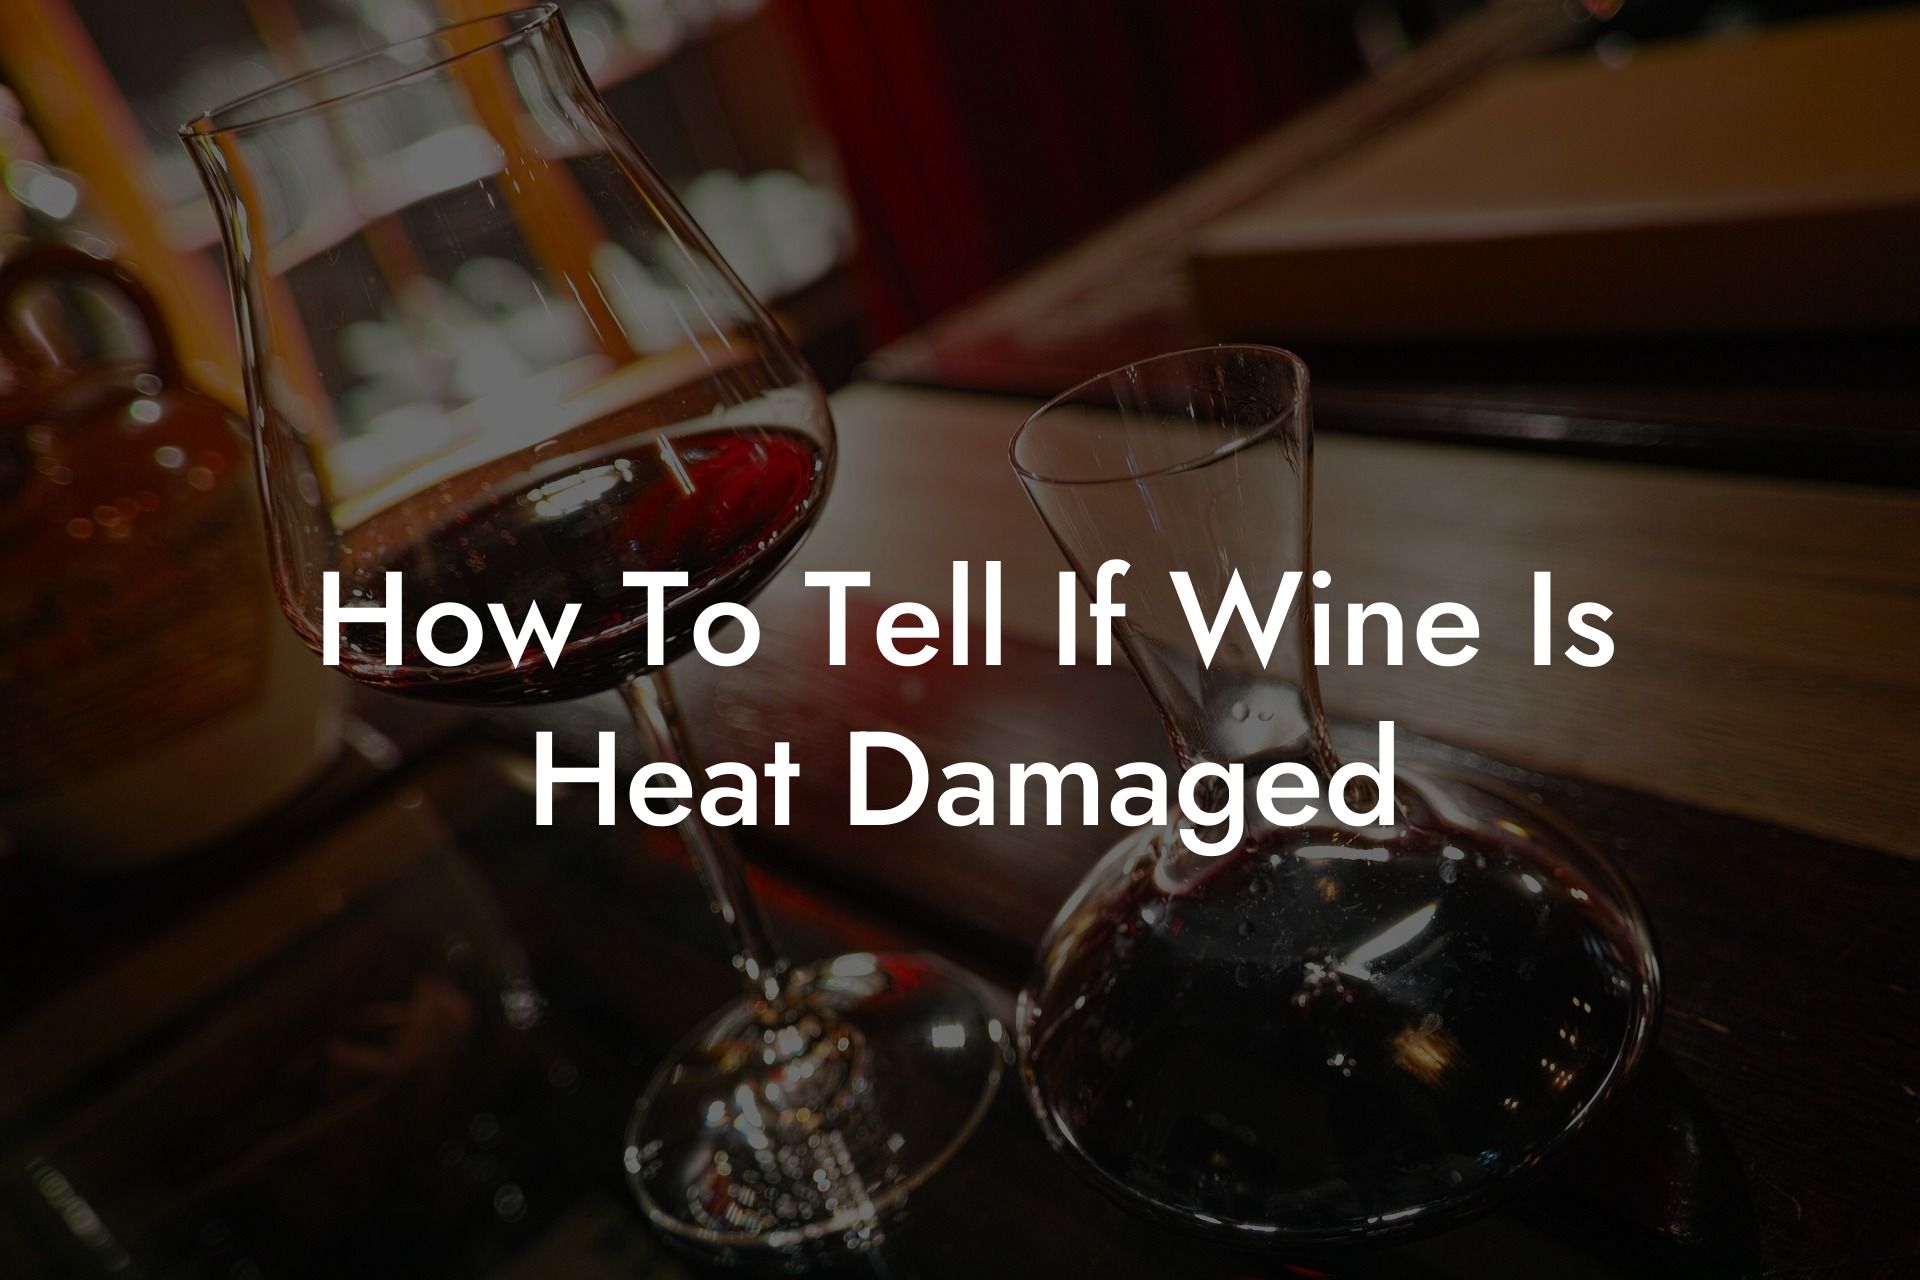 How To Tell If Wine Is Heat Damaged